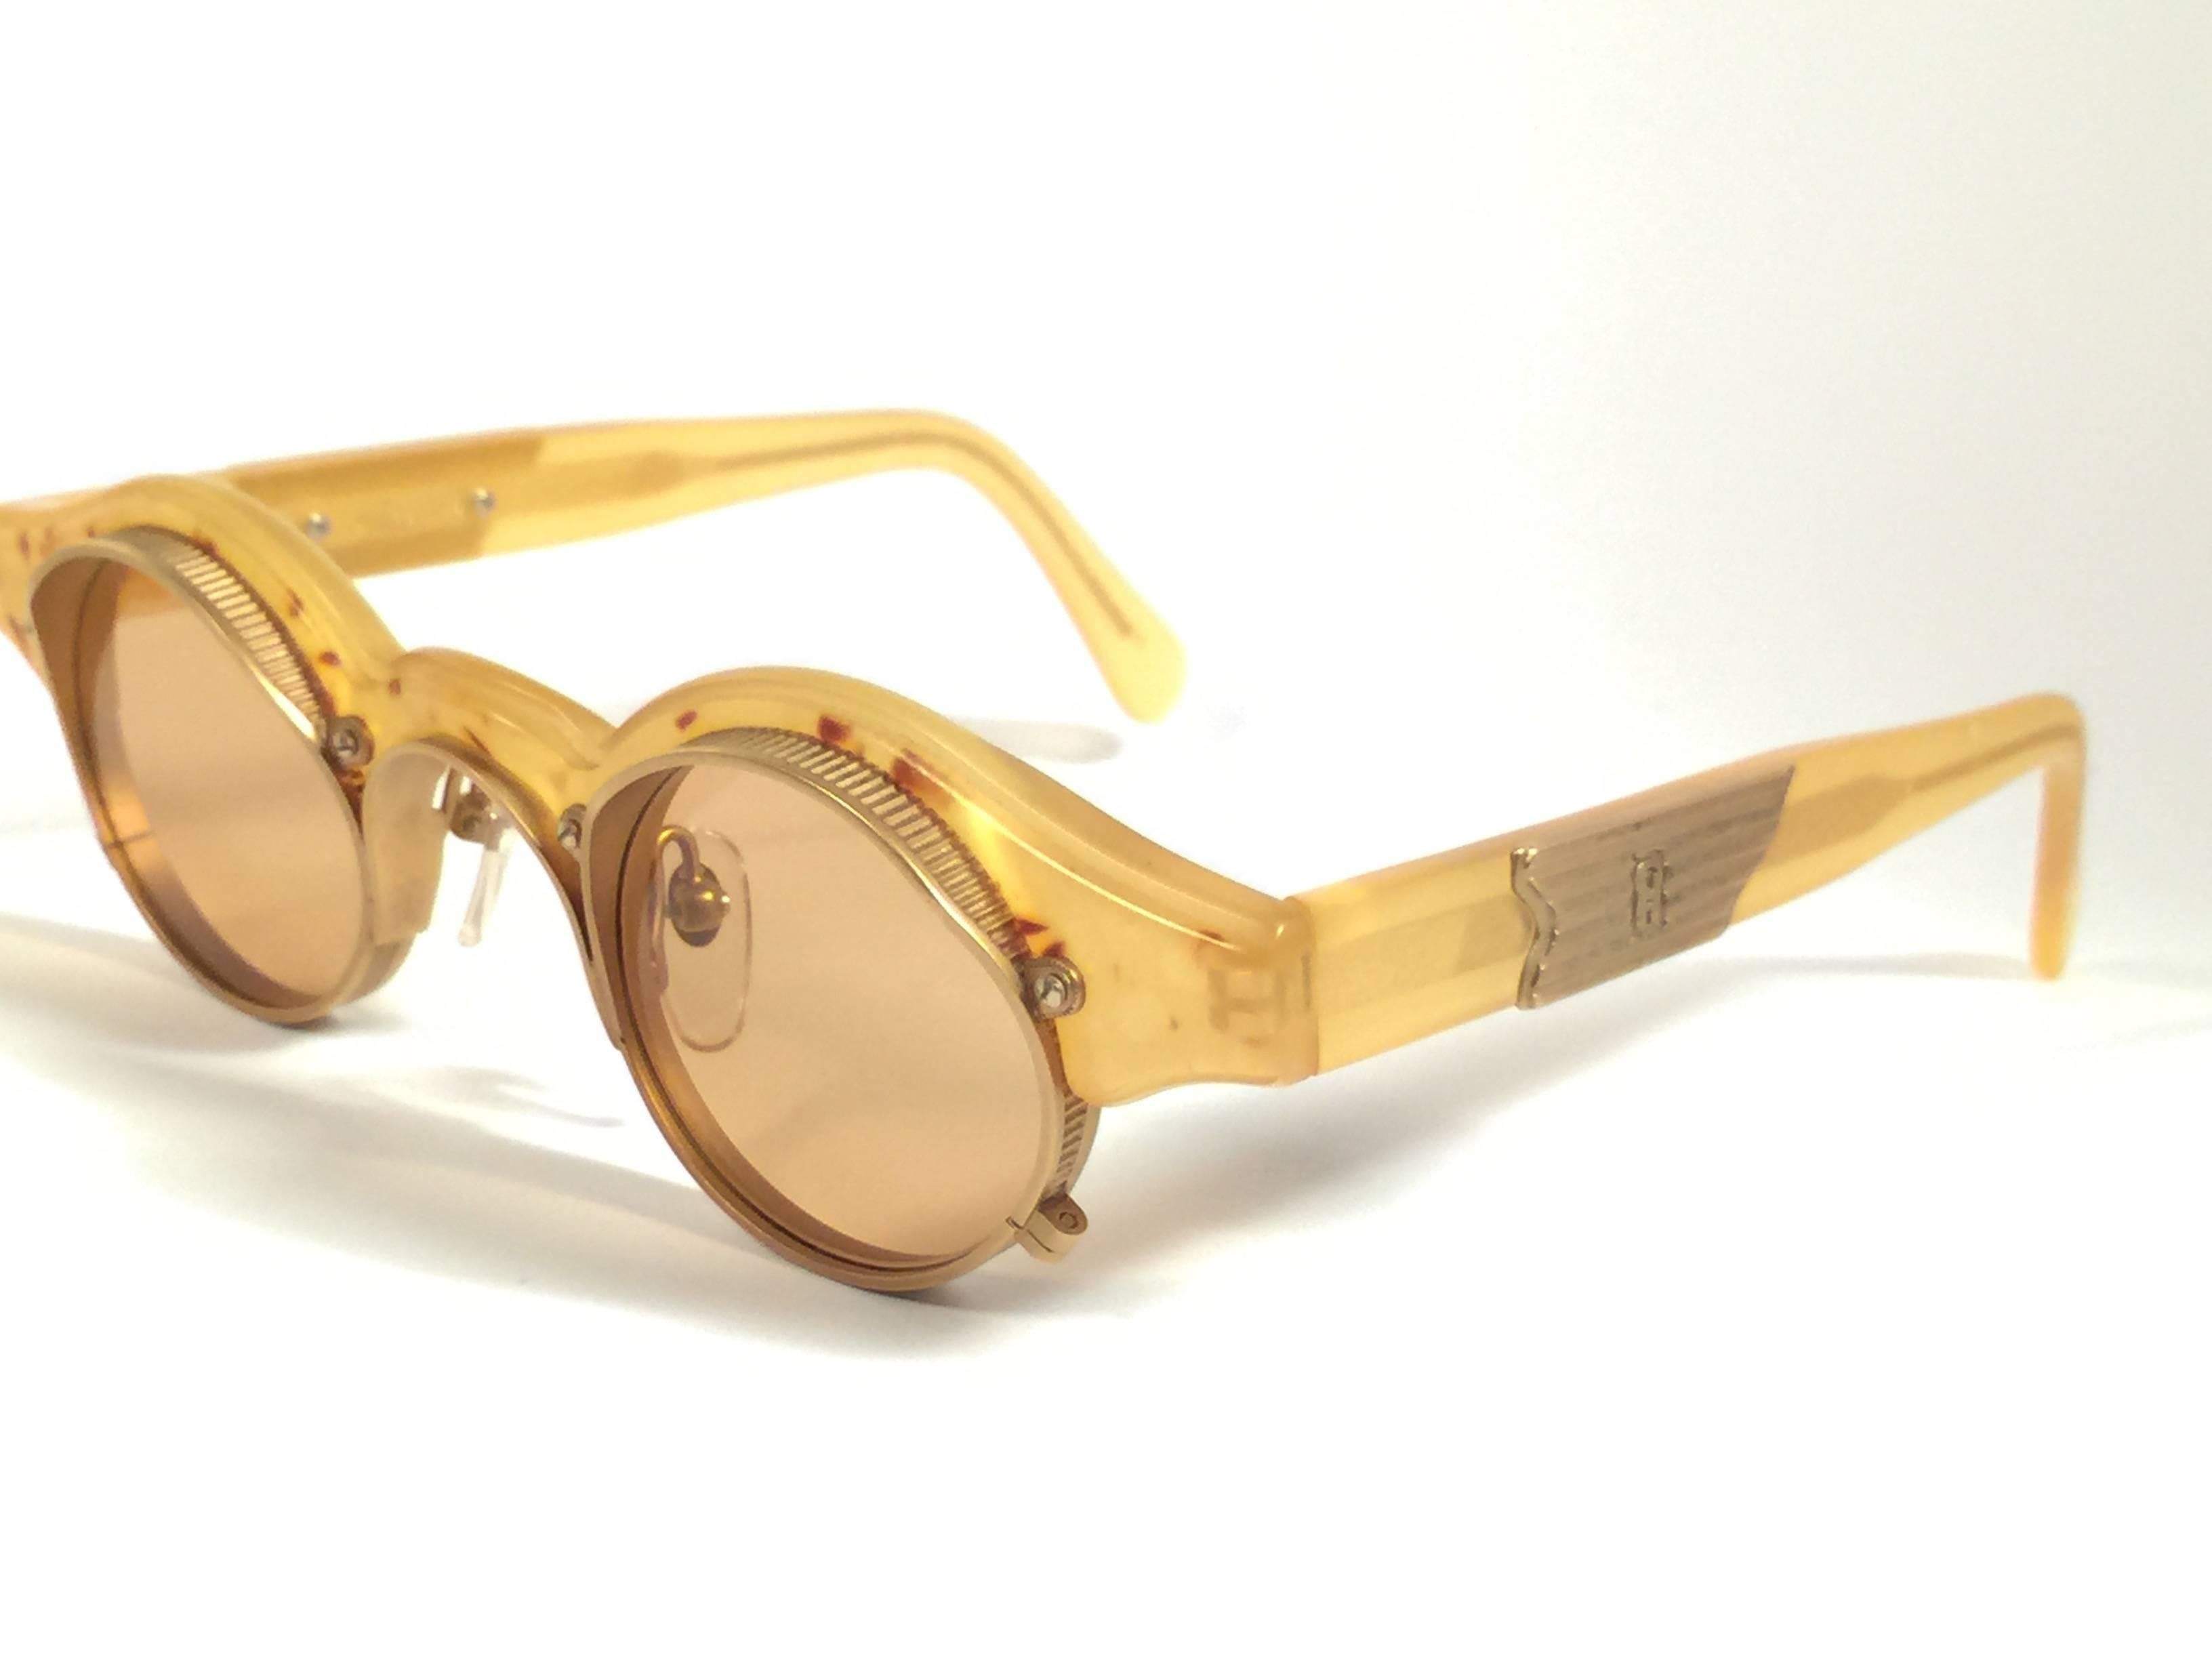 New Vintage Matsuda 10605 Yellow & Gold Collector 1990 Made in Japan Sunglasses In New Condition For Sale In Baleares, Baleares